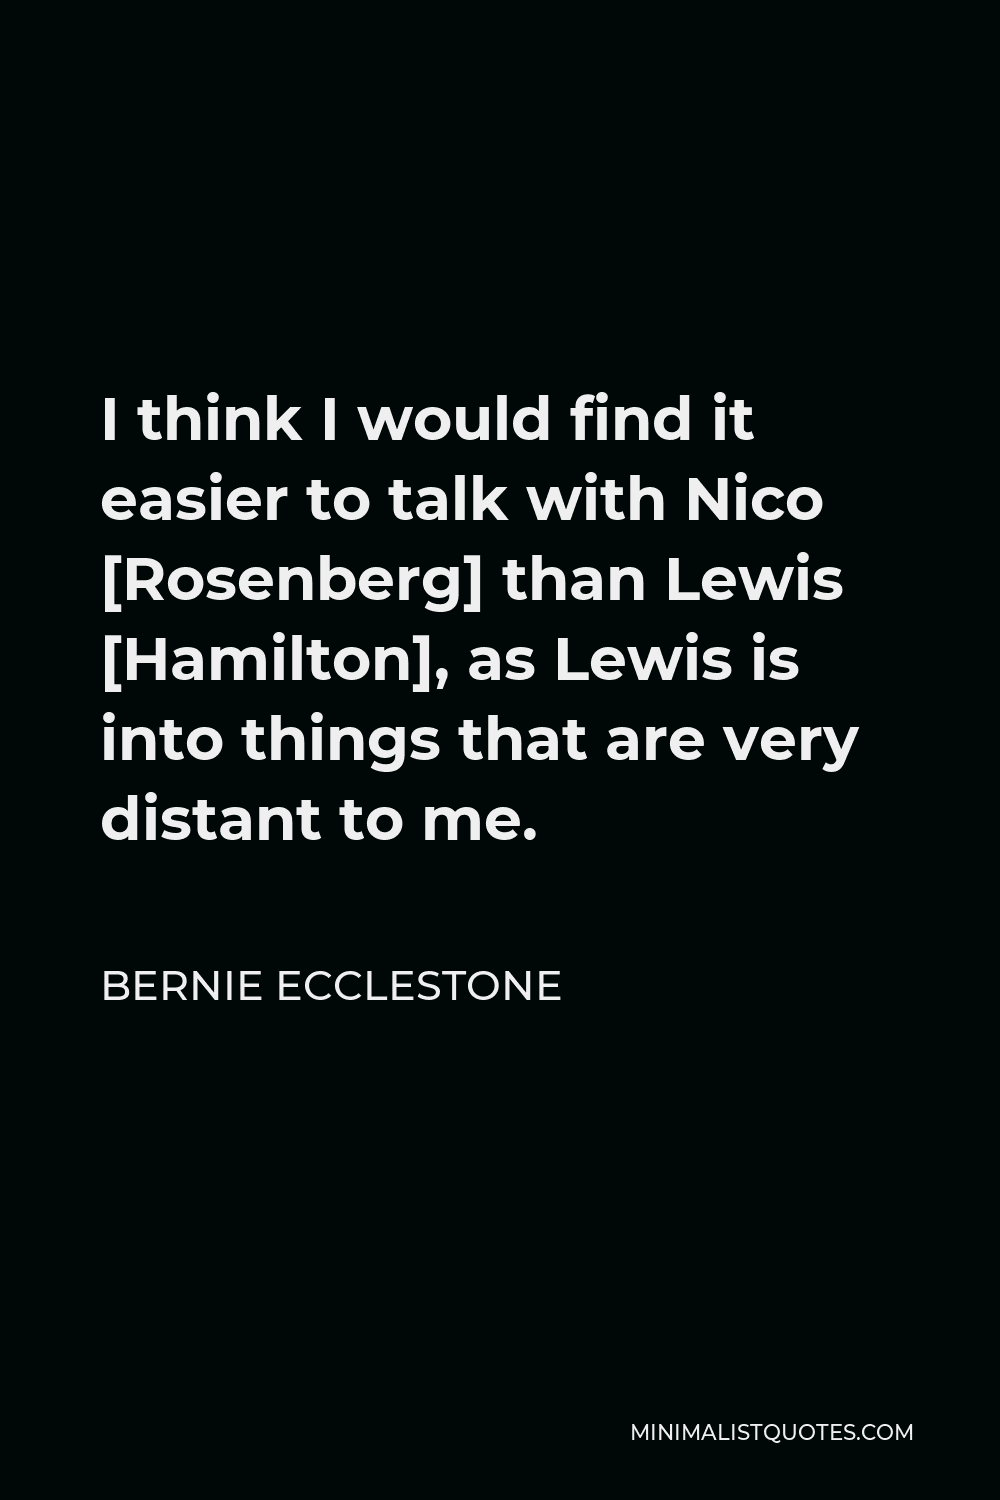 Bernie Ecclestone Quote - I think I would find it easier to talk with Nico [Rosenberg] than Lewis [Hamilton], as Lewis is into things that are very distant to me.